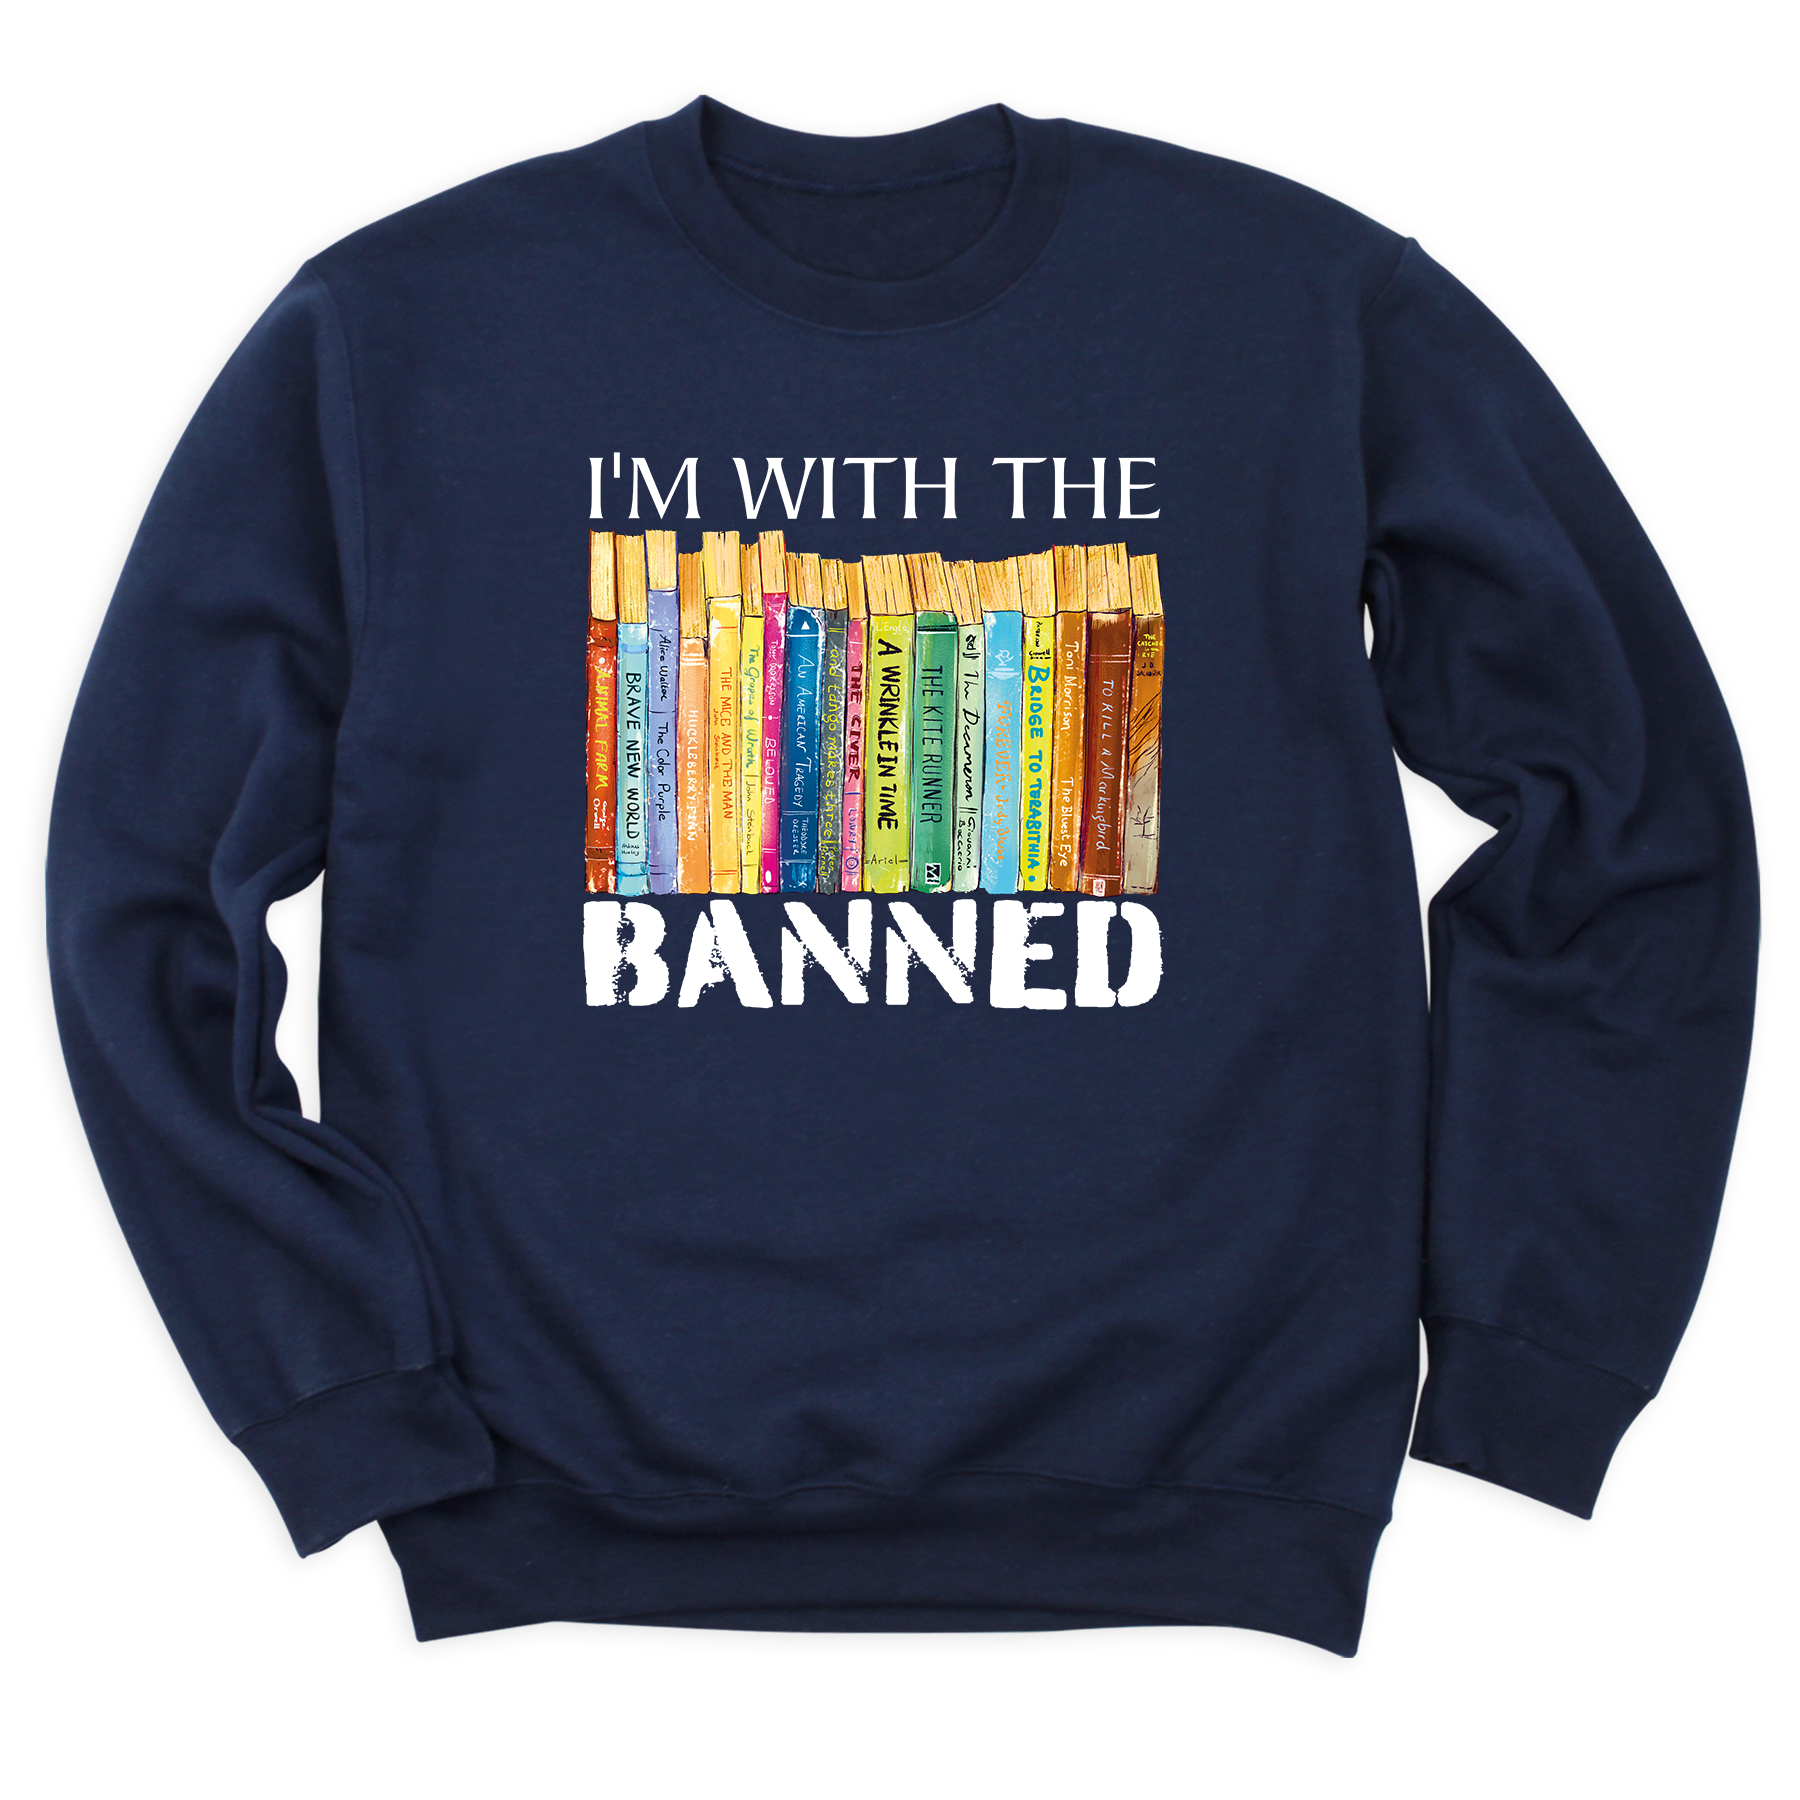 i'm with banned shirts navy blue